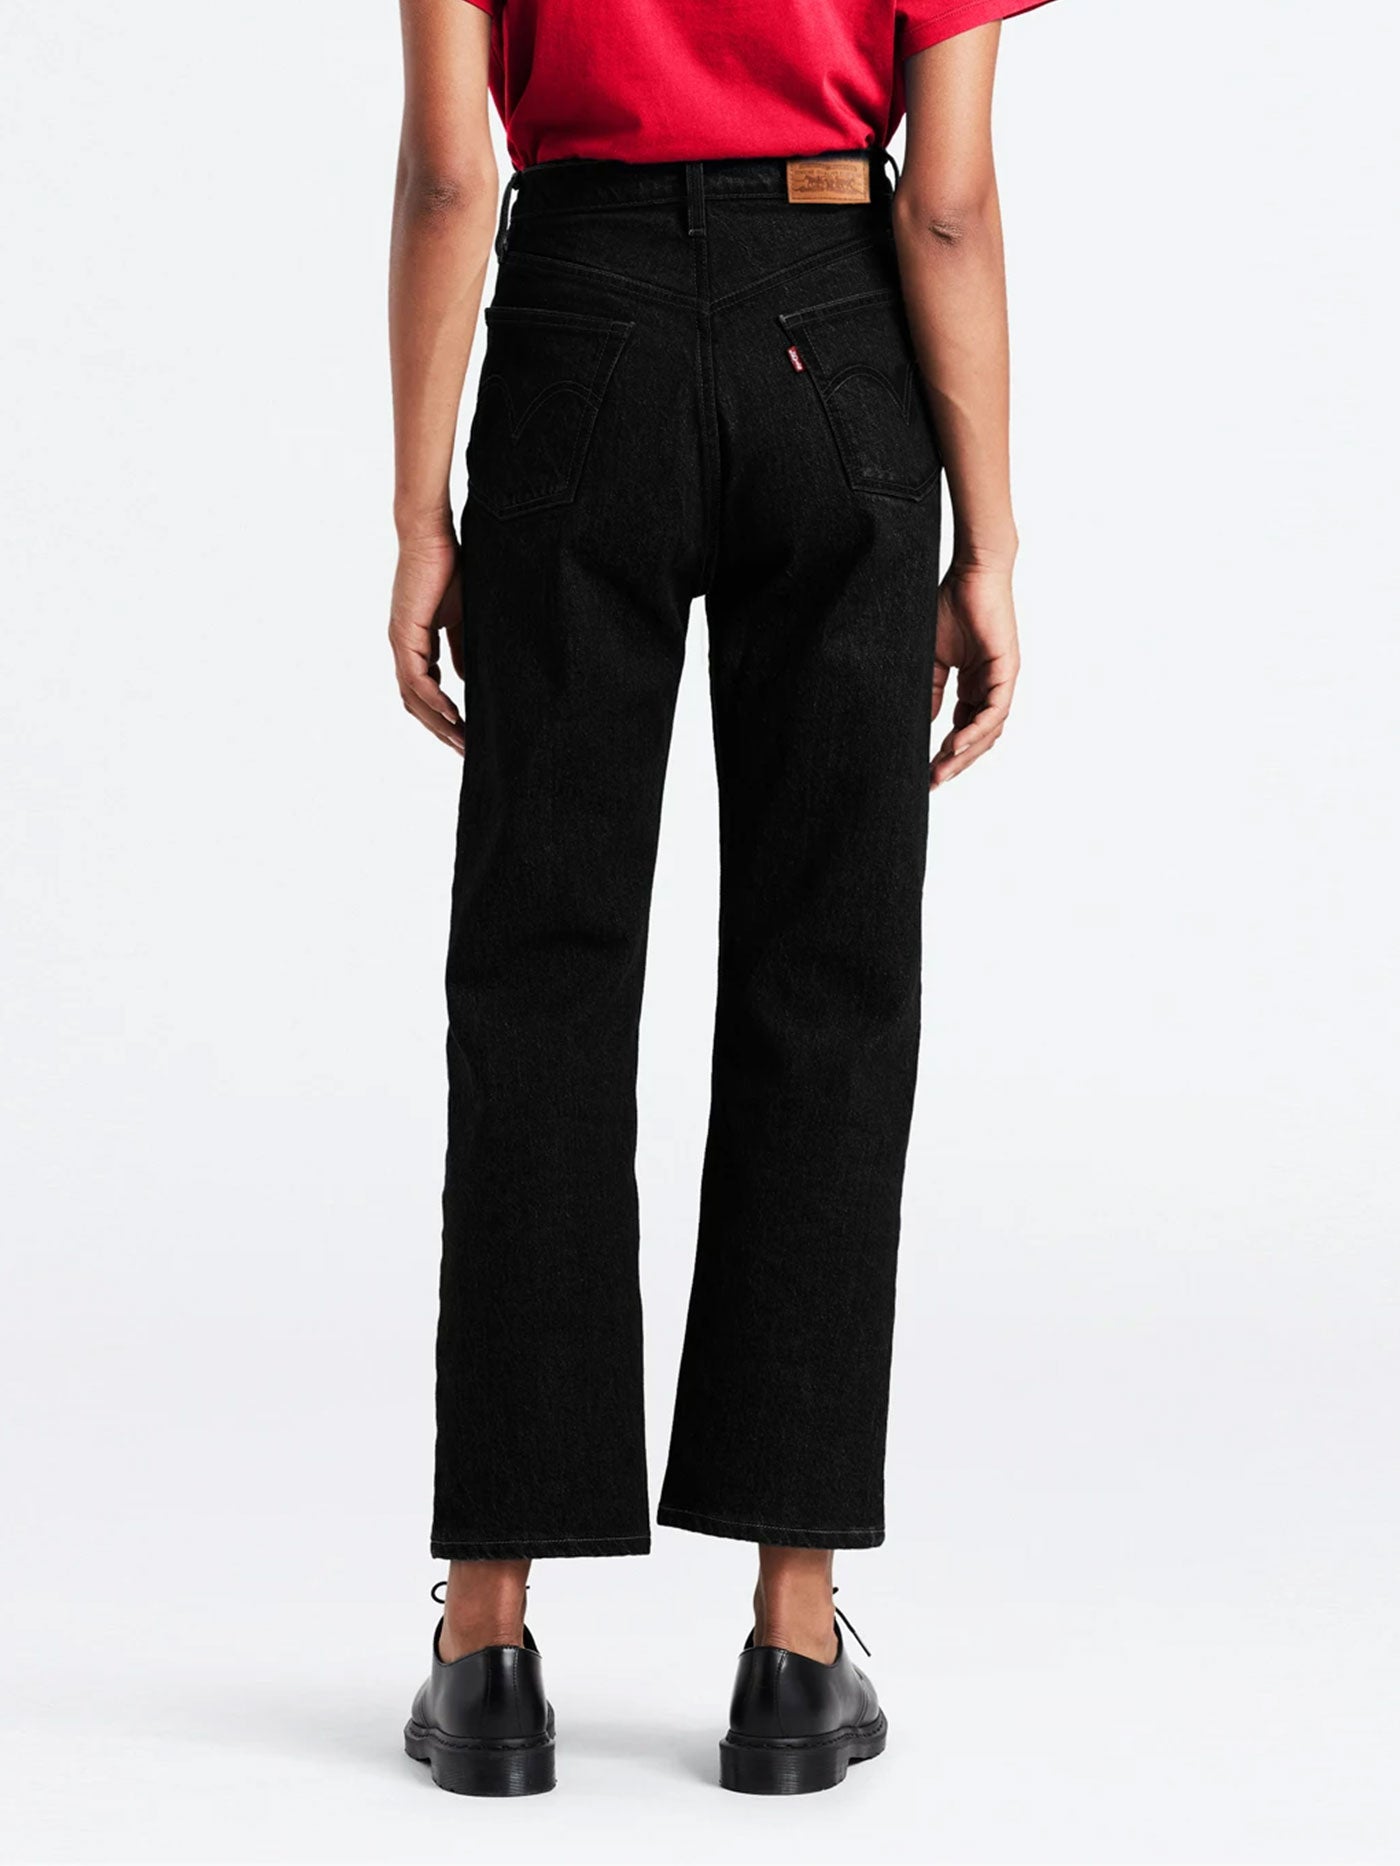 Levi's Ribcage Straight Ankle Fit Jeans